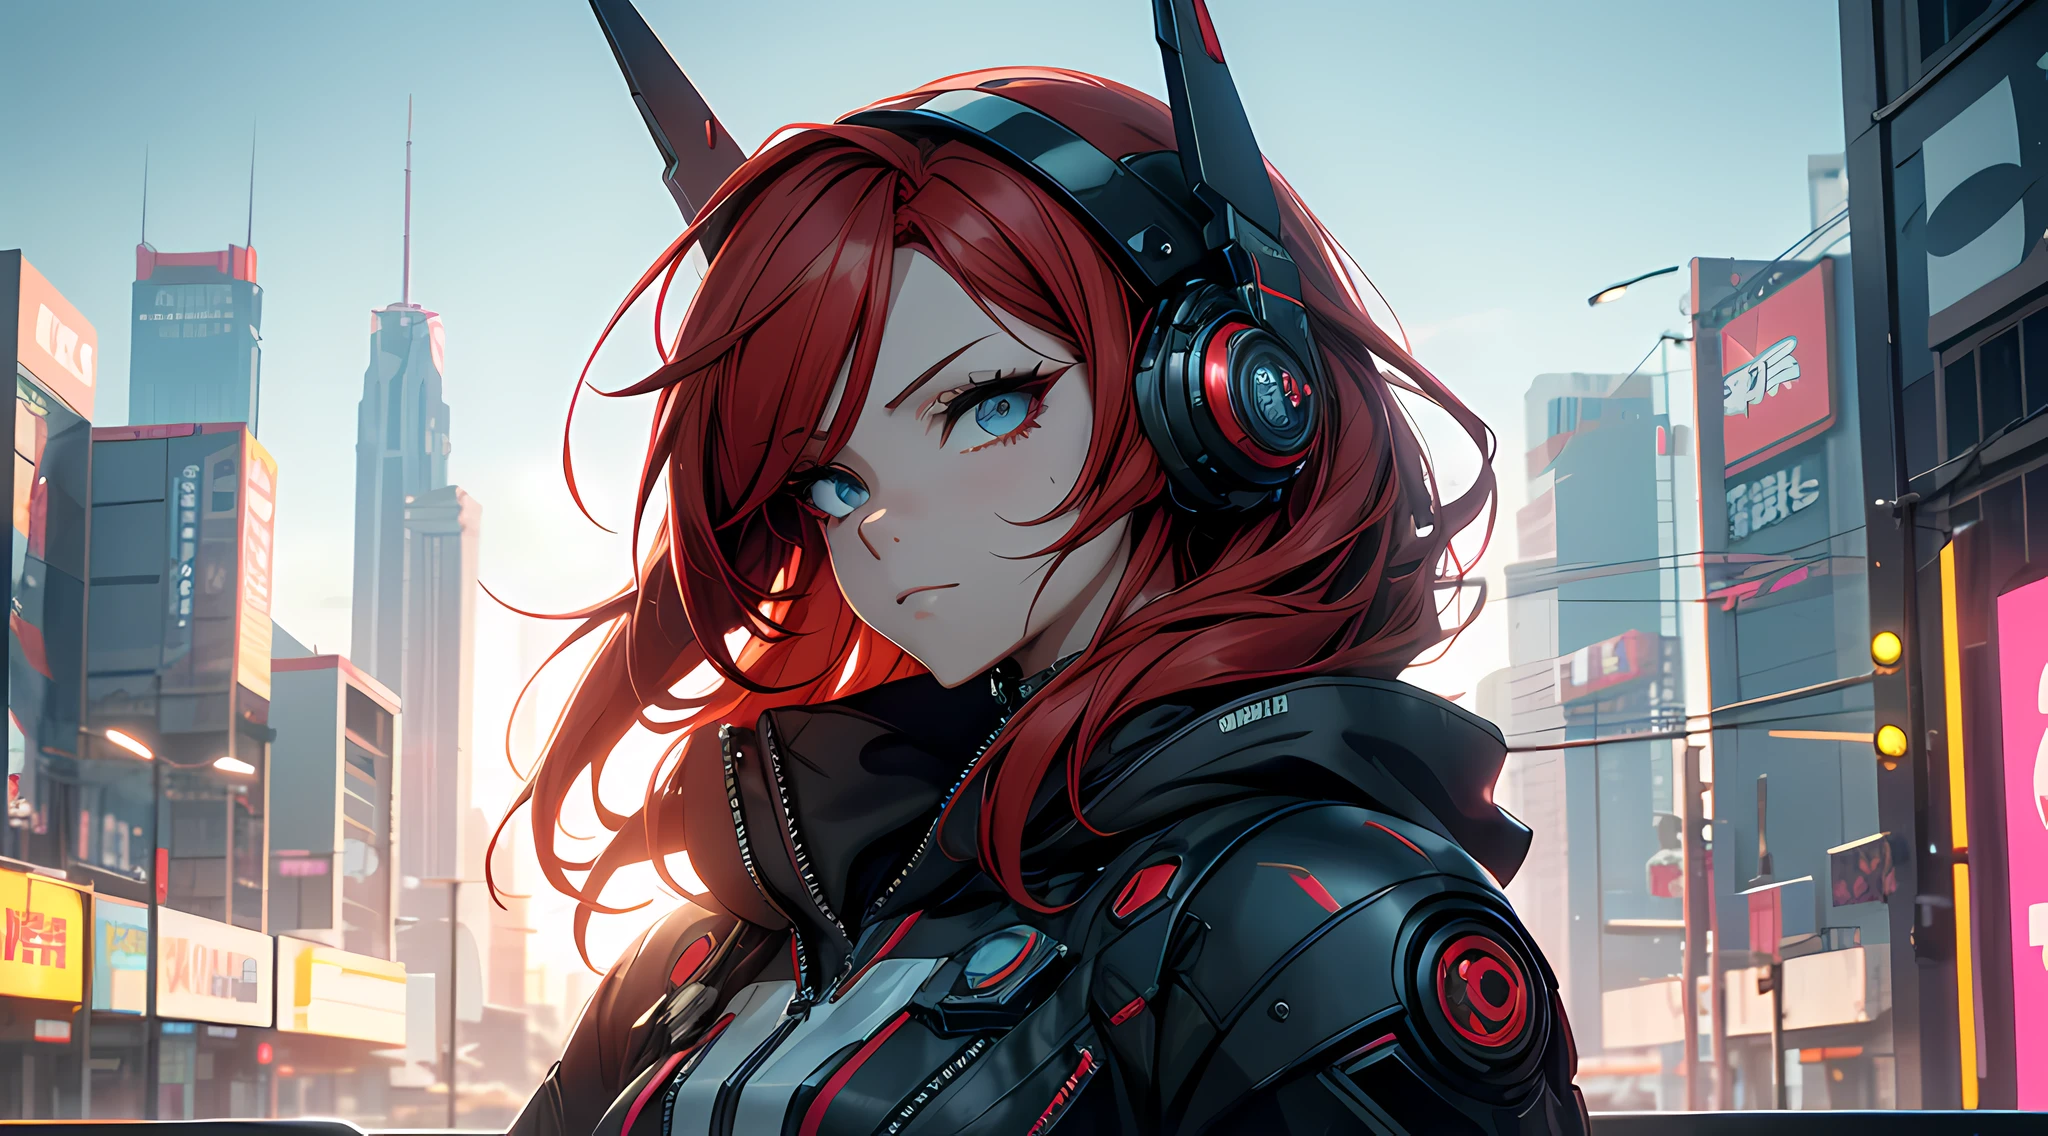 a close up of a person with red hair and a helmet, cyberpunk anime girl mech, digital cyberpunk anime art, female cyberpunk anime girl, cyberpunk anime girl in hoodie, anime cyberpunk art, girl in mecha cyber armor, cyberpunk anime art, cyberpunk anime girl, redhead female cyberpunk, modern cyberpunk anime, cyber noir, neon scales and cyborg tech, anime cyberpunk,shine metal,sharp focus,raytracing